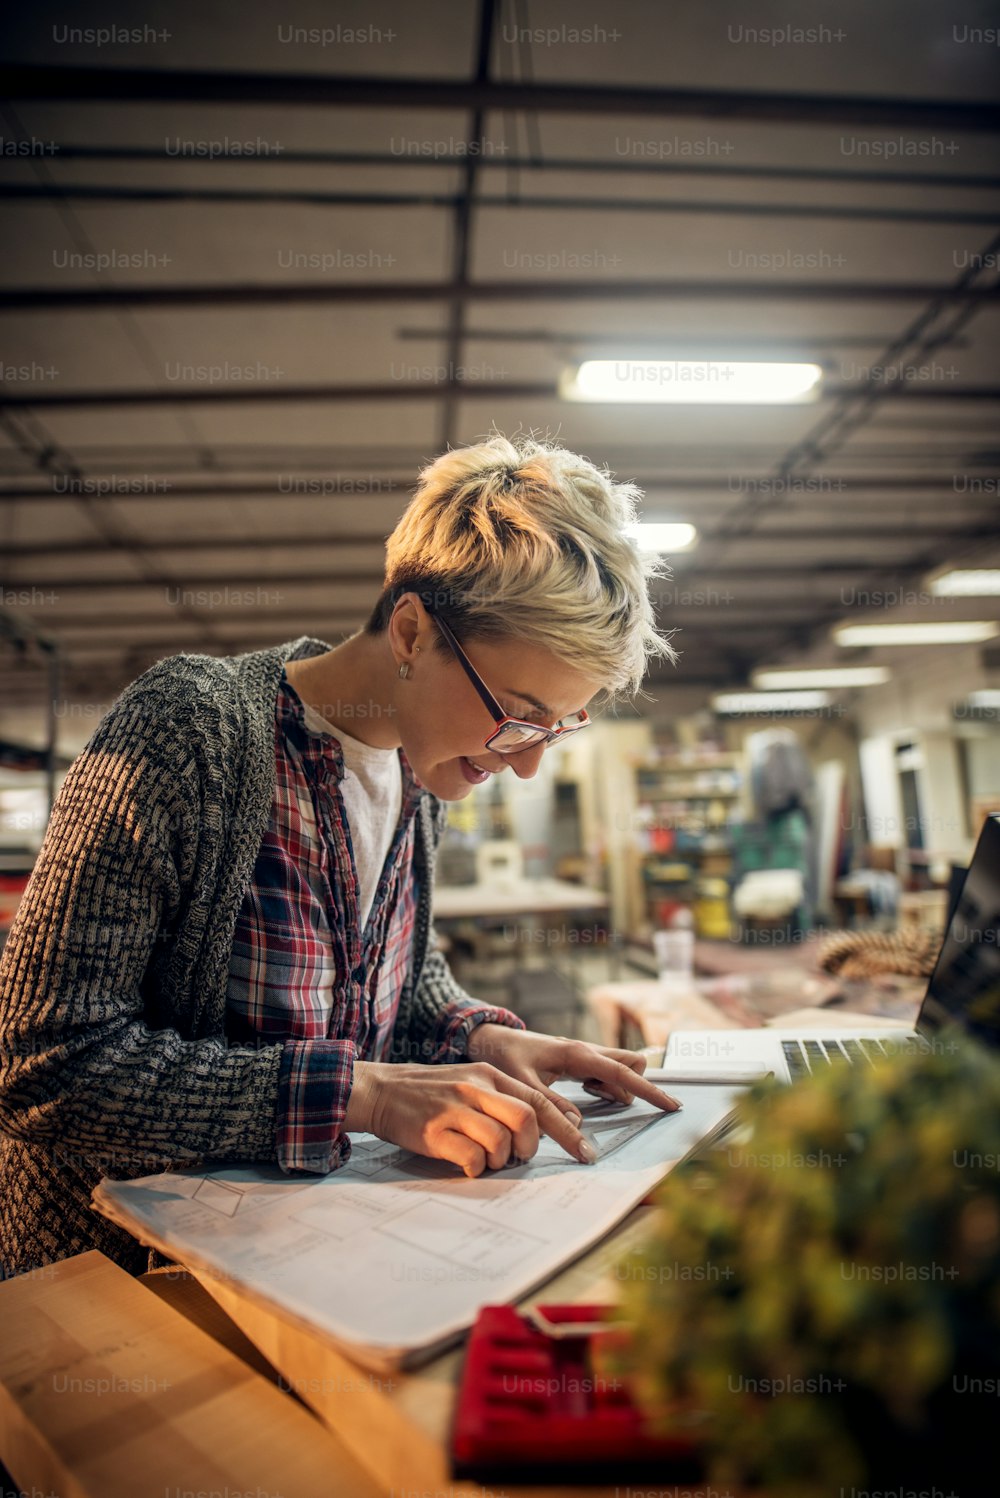 Close up view of charming smiling motivated short hair attractive middle aged industrial female engineer with eyeglasses working with blueprints and laptop in the workshop.